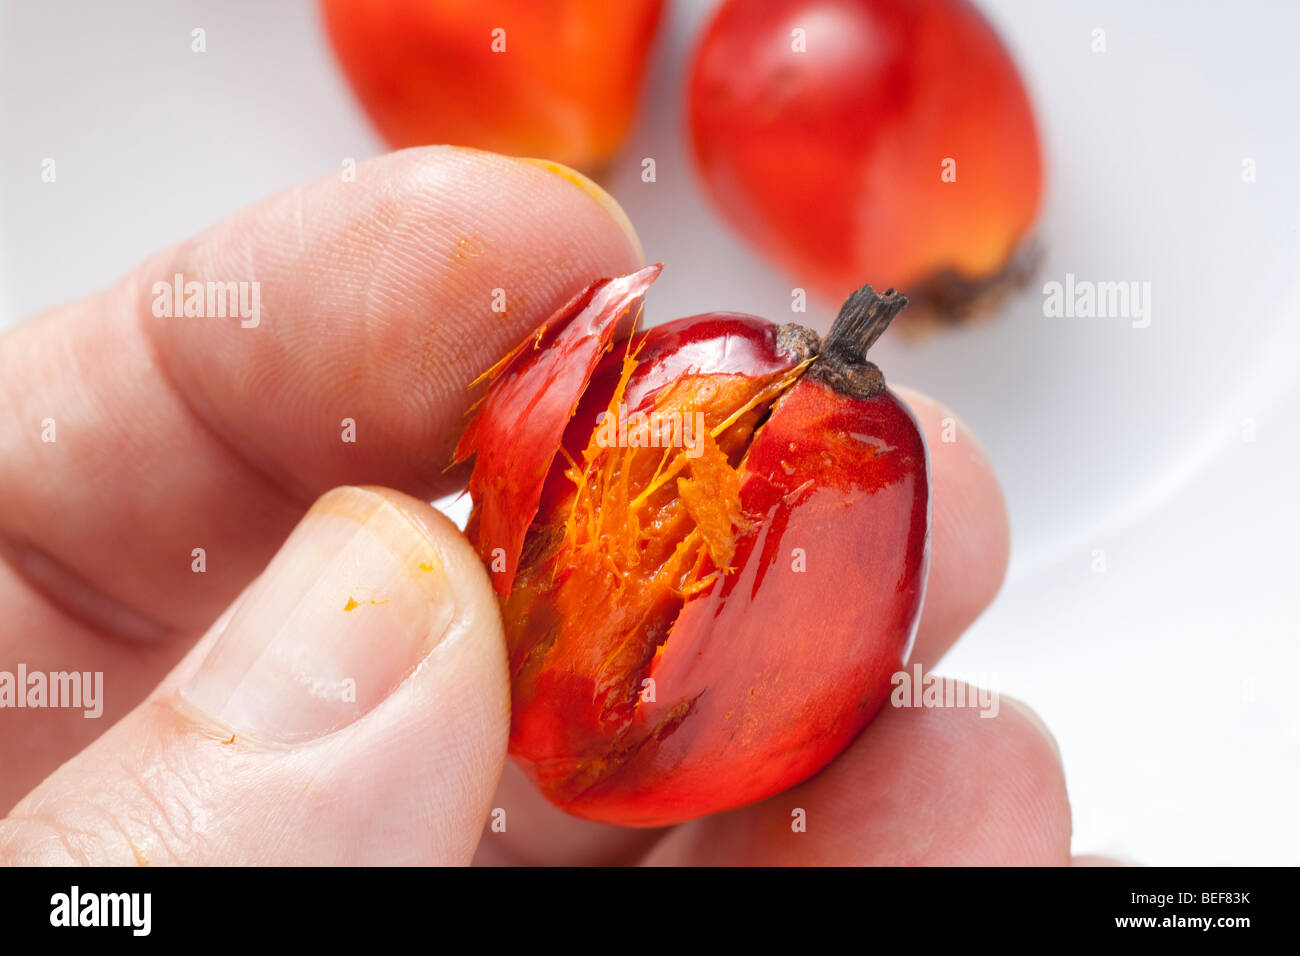 Oil palm fruit with broken skin showing the oily nature of the pulp surrounding the seed Stock Photo